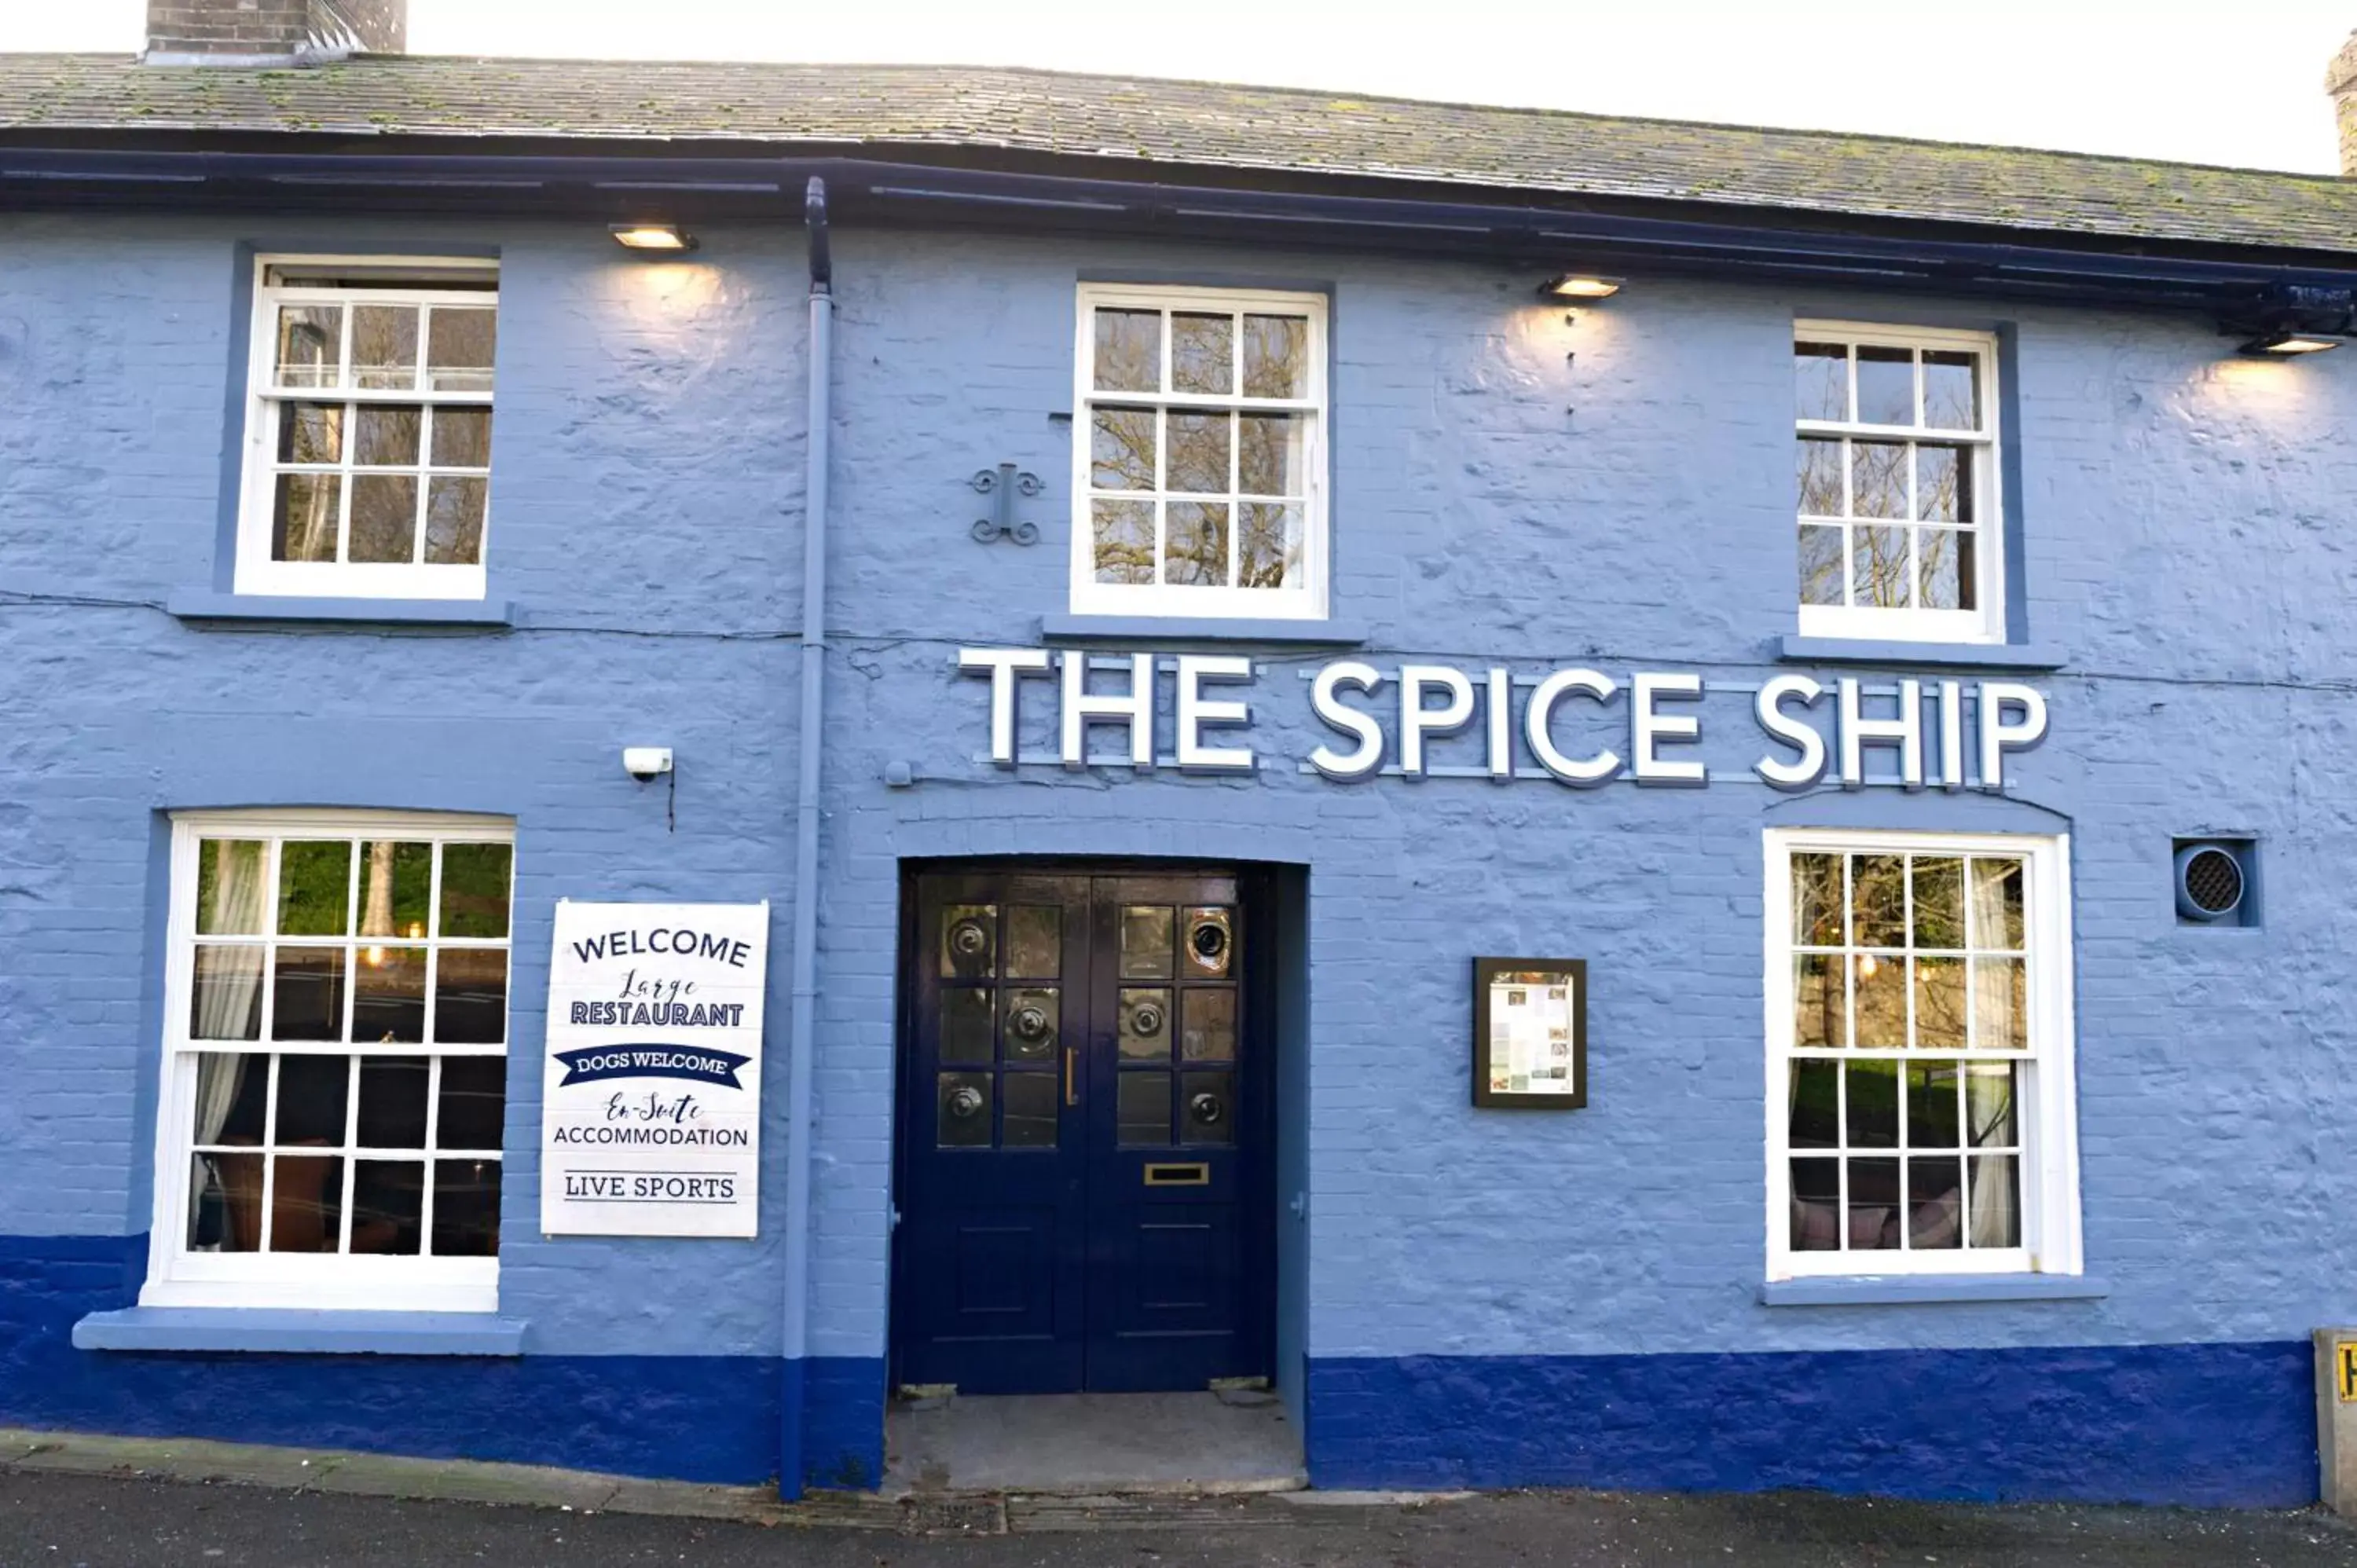 Property building in The Spice Ship